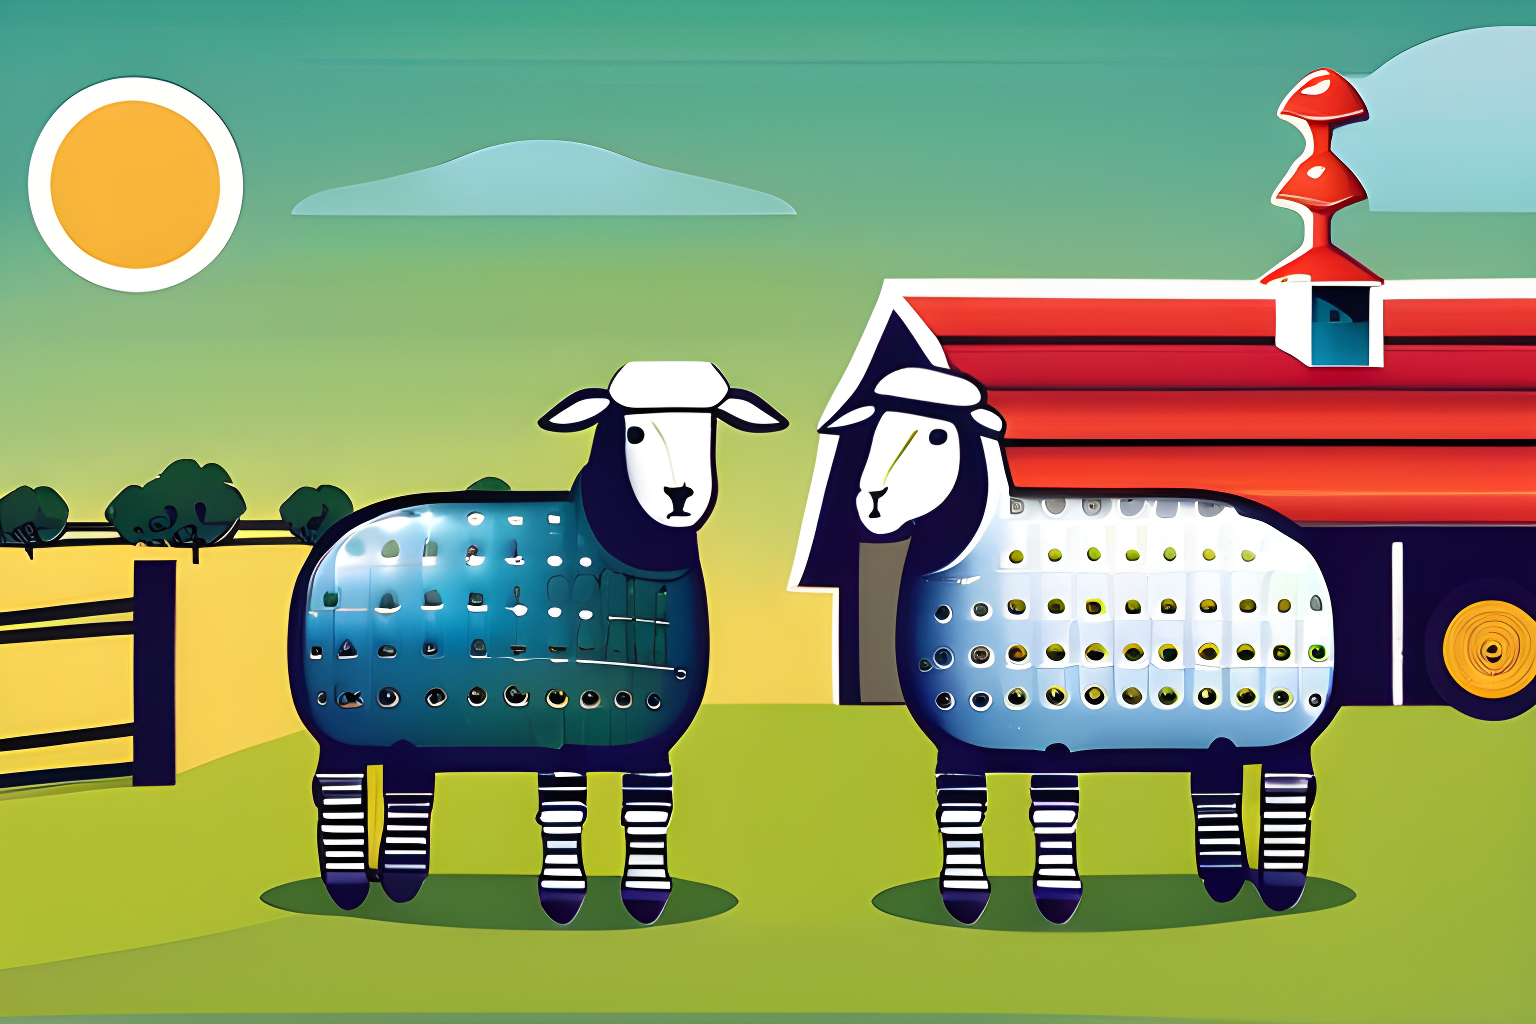 android robots, on a farm, with robot sheeps